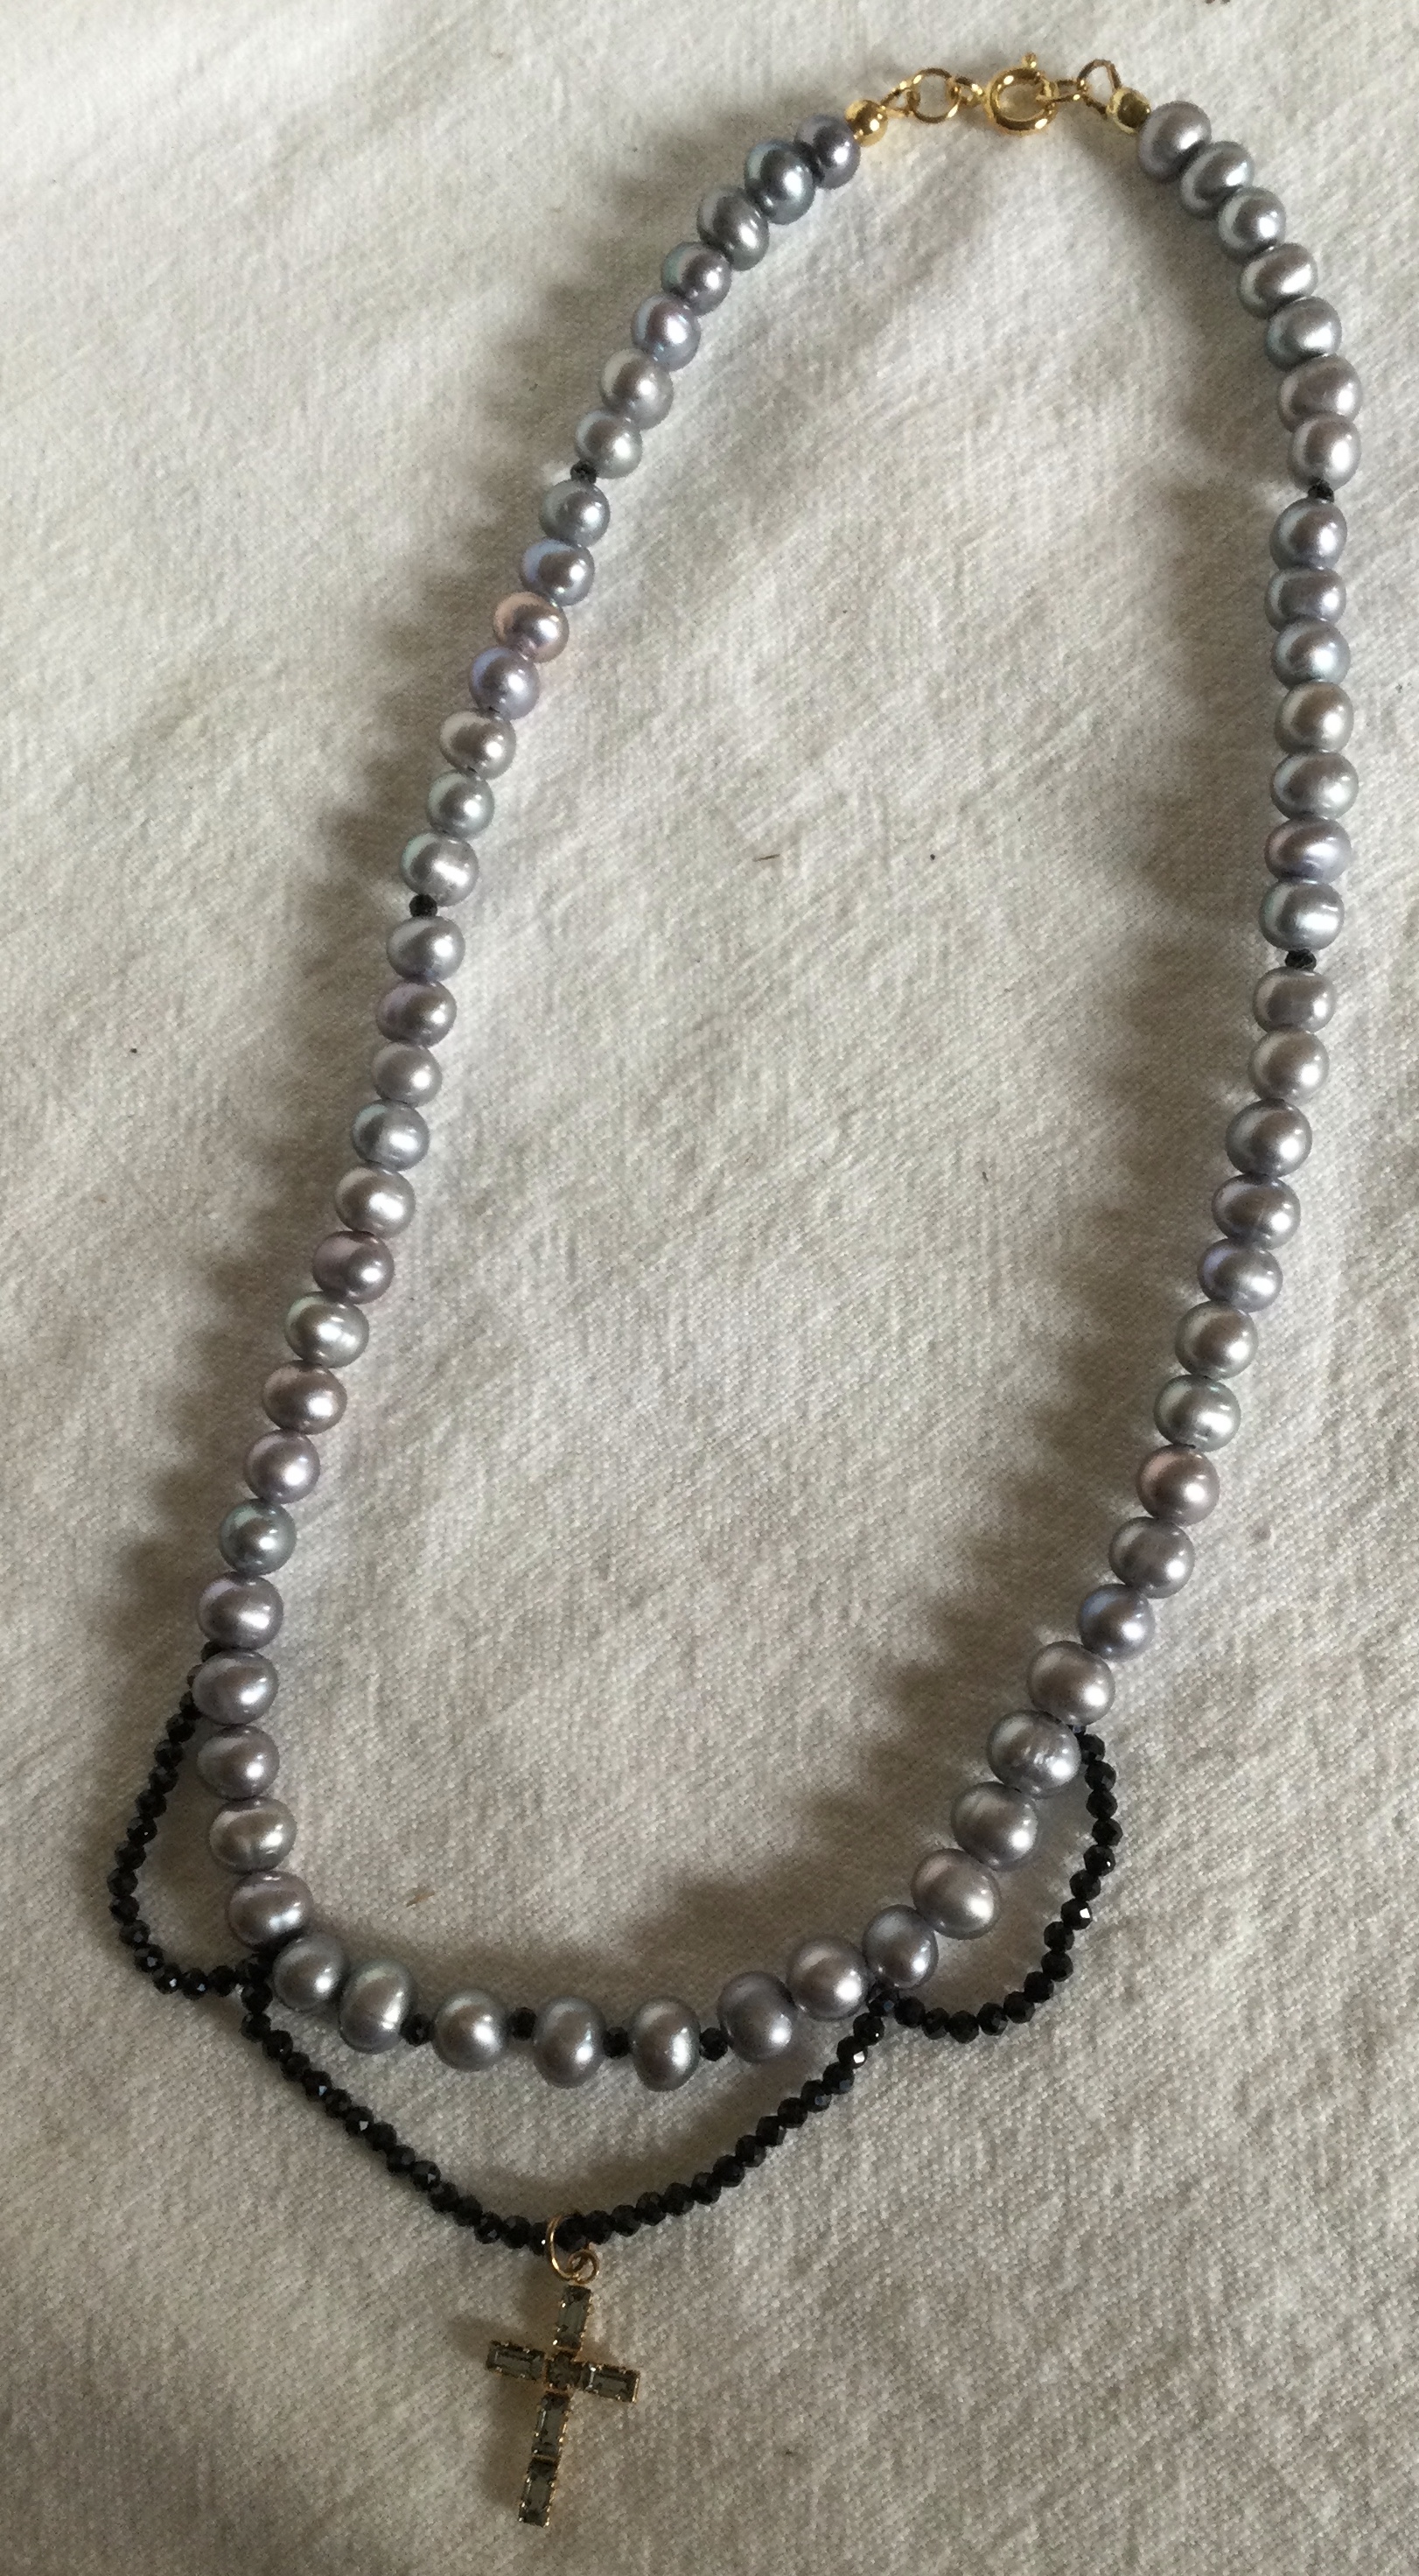 Silver freshwater pearls and black spinel necklace - Image 2 of 4